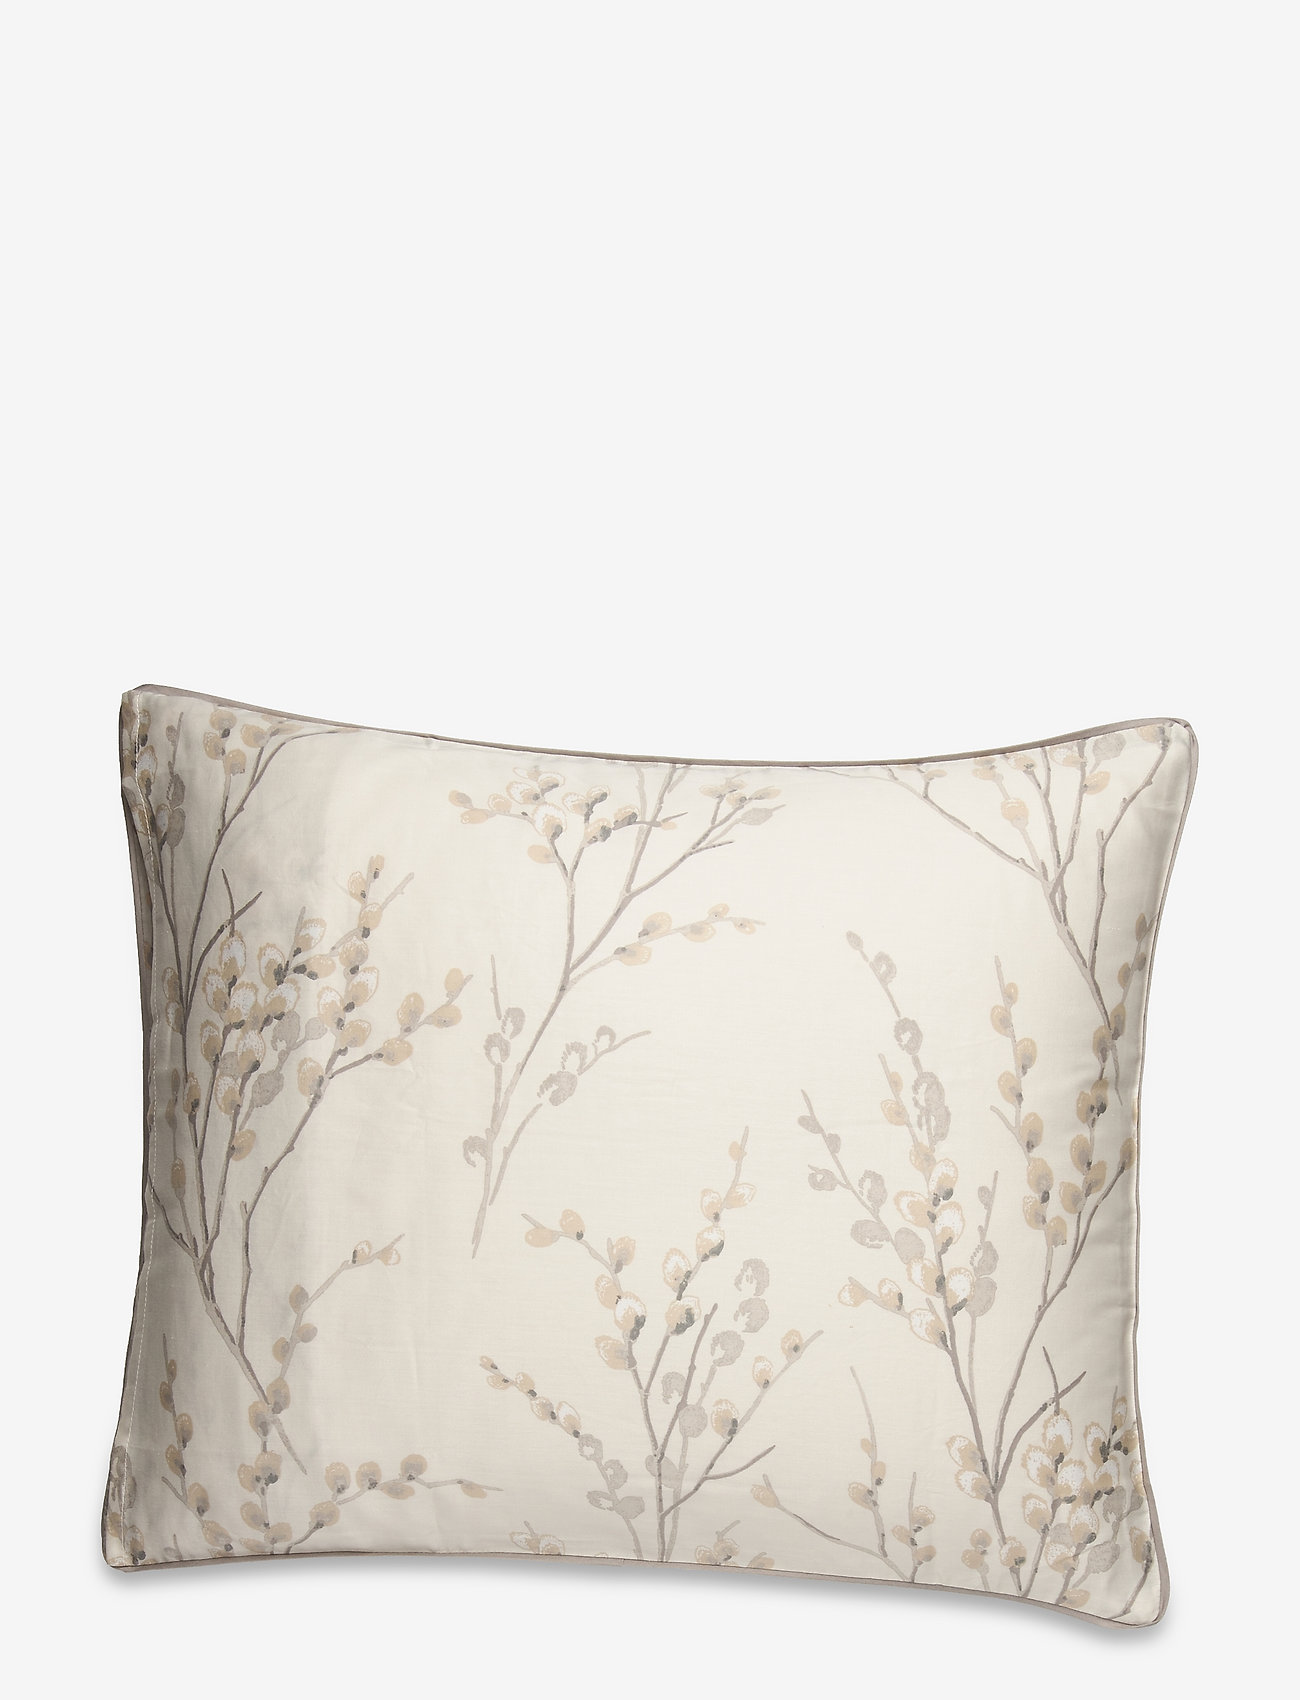 CUSHION COVER IN LAURA ASHLEY PUSSY WILLOW Off WHITE SEASPRAY